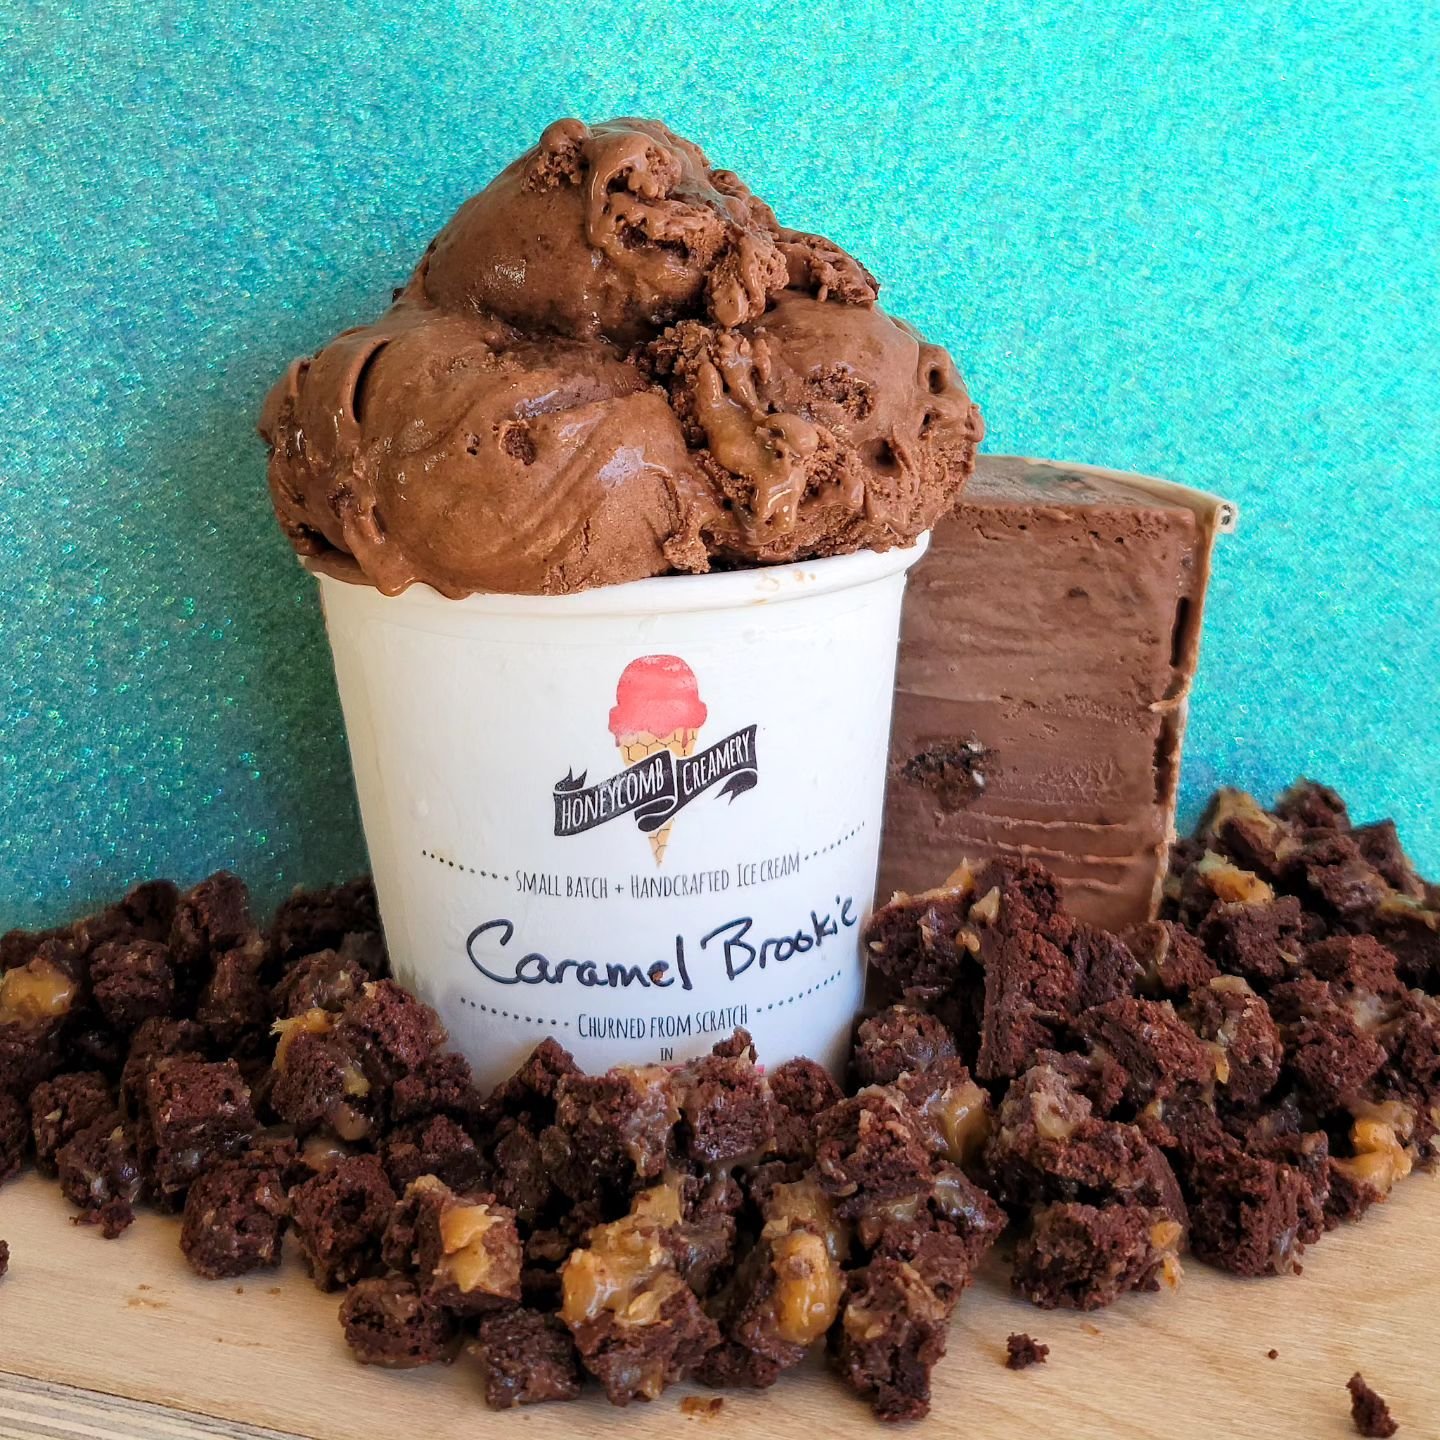 Hm, this new flavor feels a little familiar...🤔

That's right folks, CARAMEL BROOKIE is back for a few more weeks! Just in case you need reminding, it's a rich chocolate ice cream layered with gooey caramel and toffee brownie cookie pieces. Think th